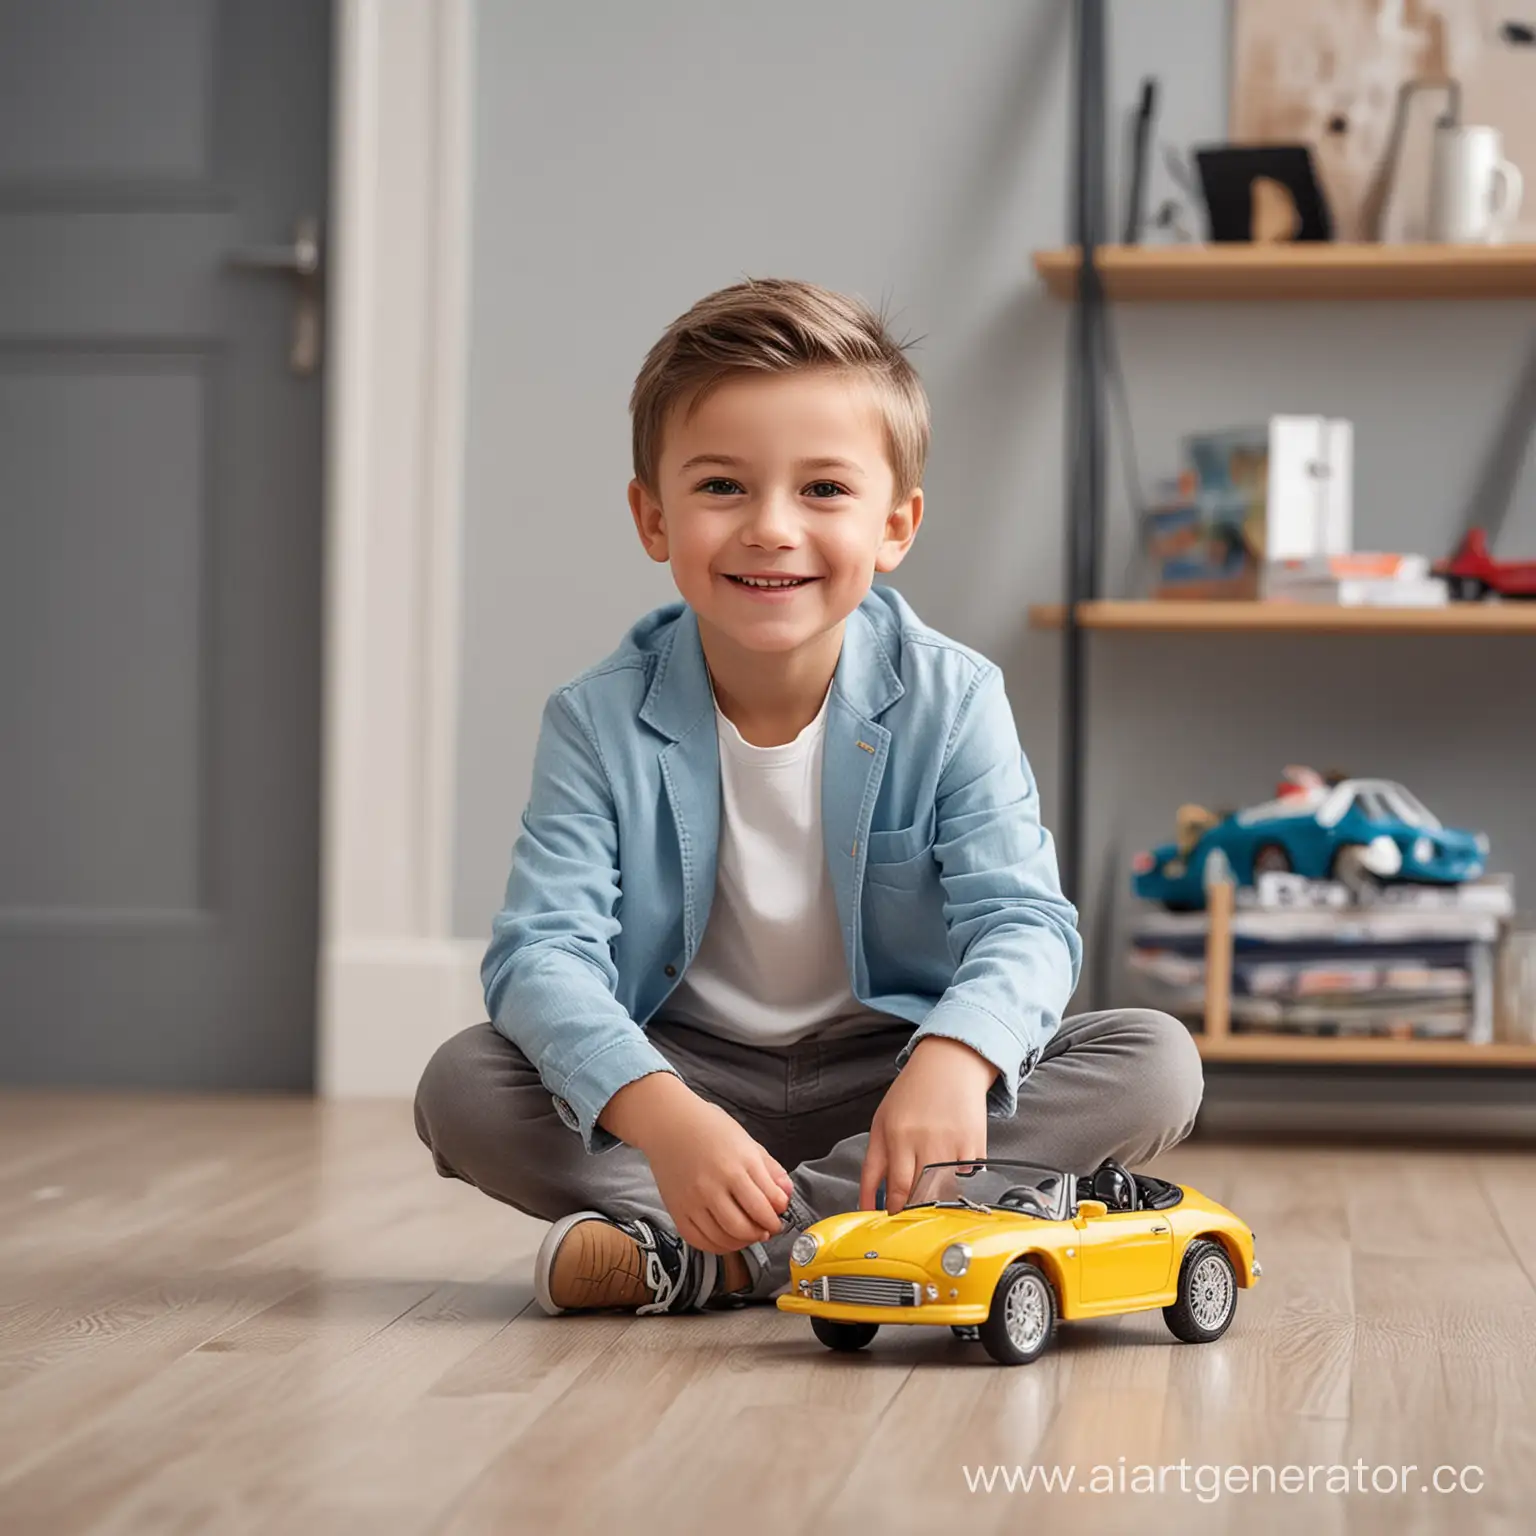 Cheerful-Boy-in-Stylish-Outfit-Playing-with-Remote-Control-Toy-Car